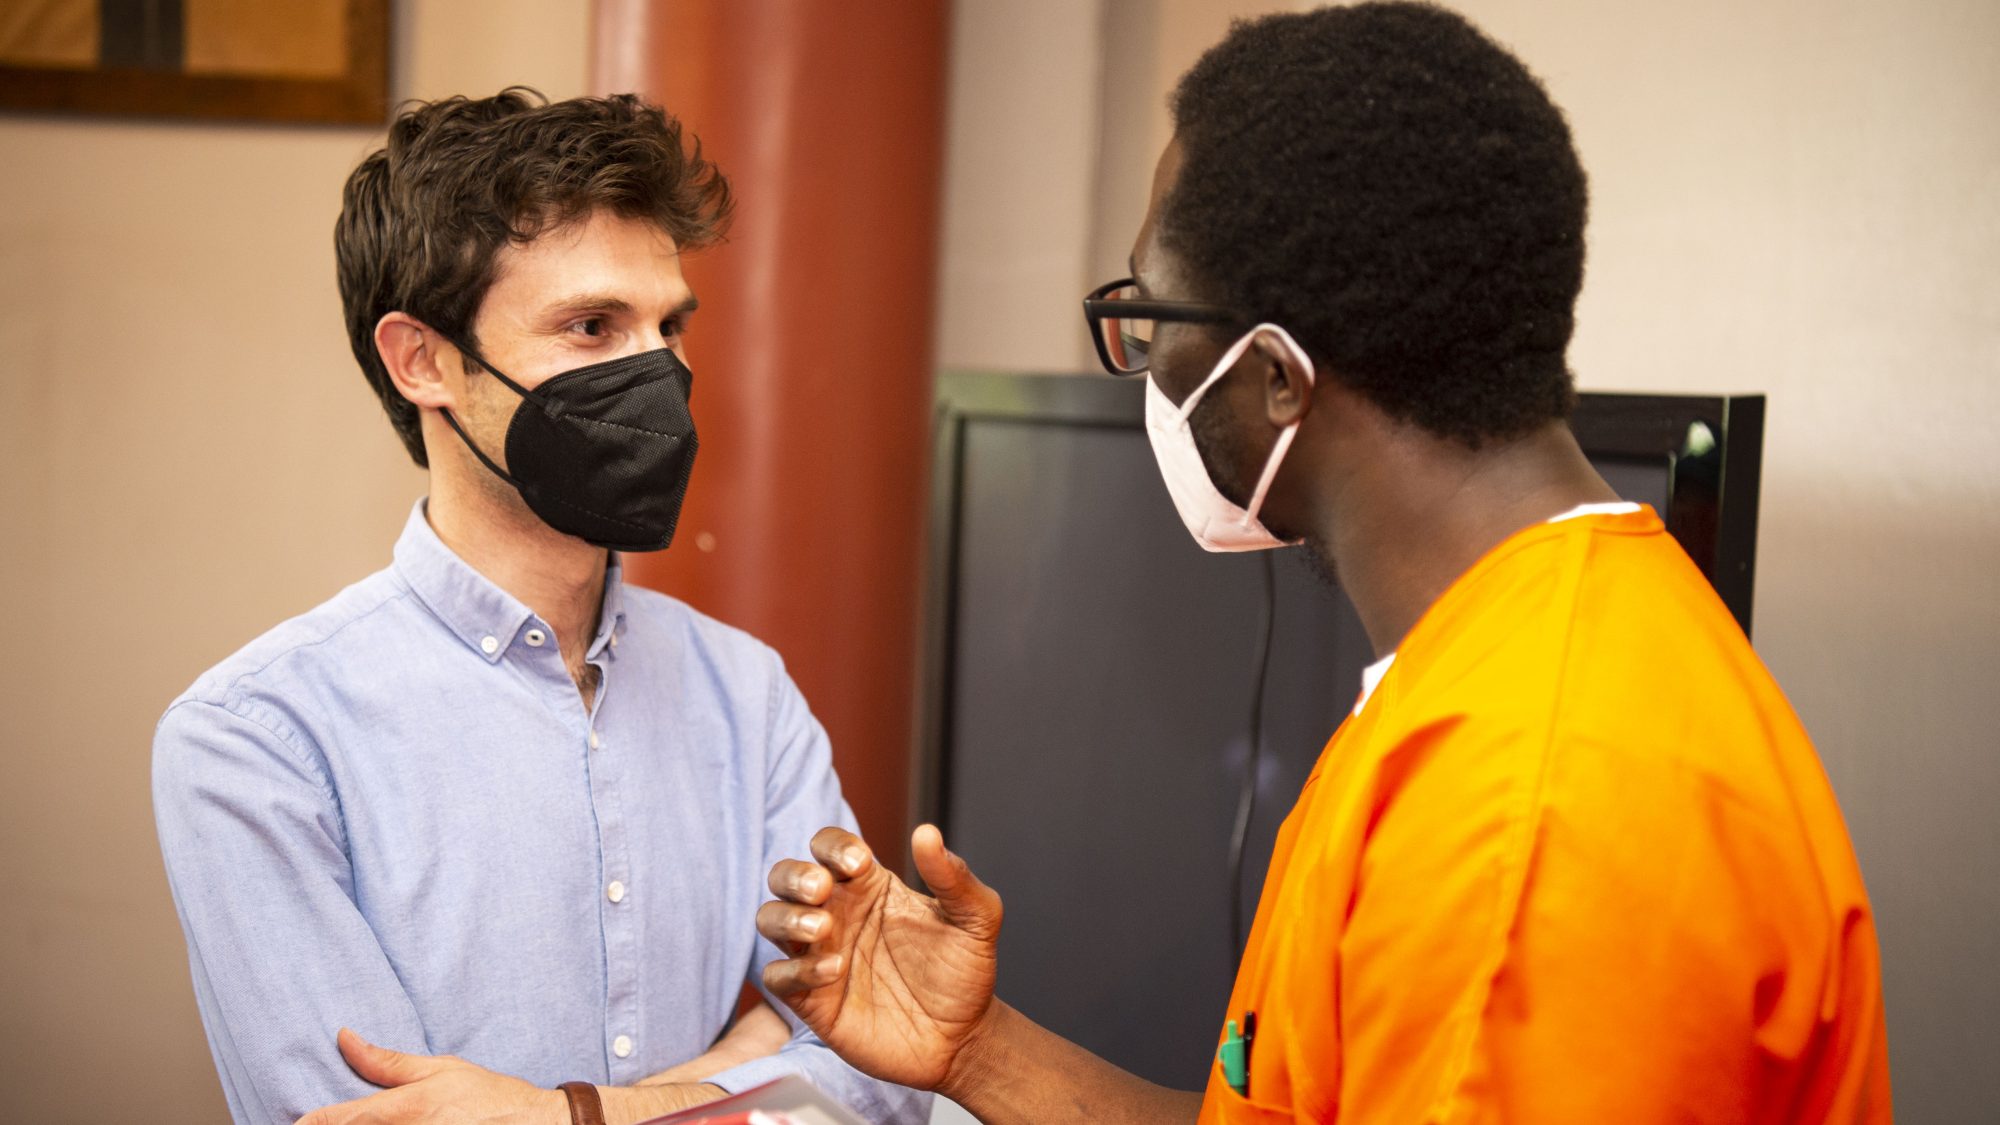 Omar Alshogre (left) wears a mask and a blue button down and talks with a scholar in Georgetown's Prison Scholars Program who wears an orange jumpsuit and a mask.